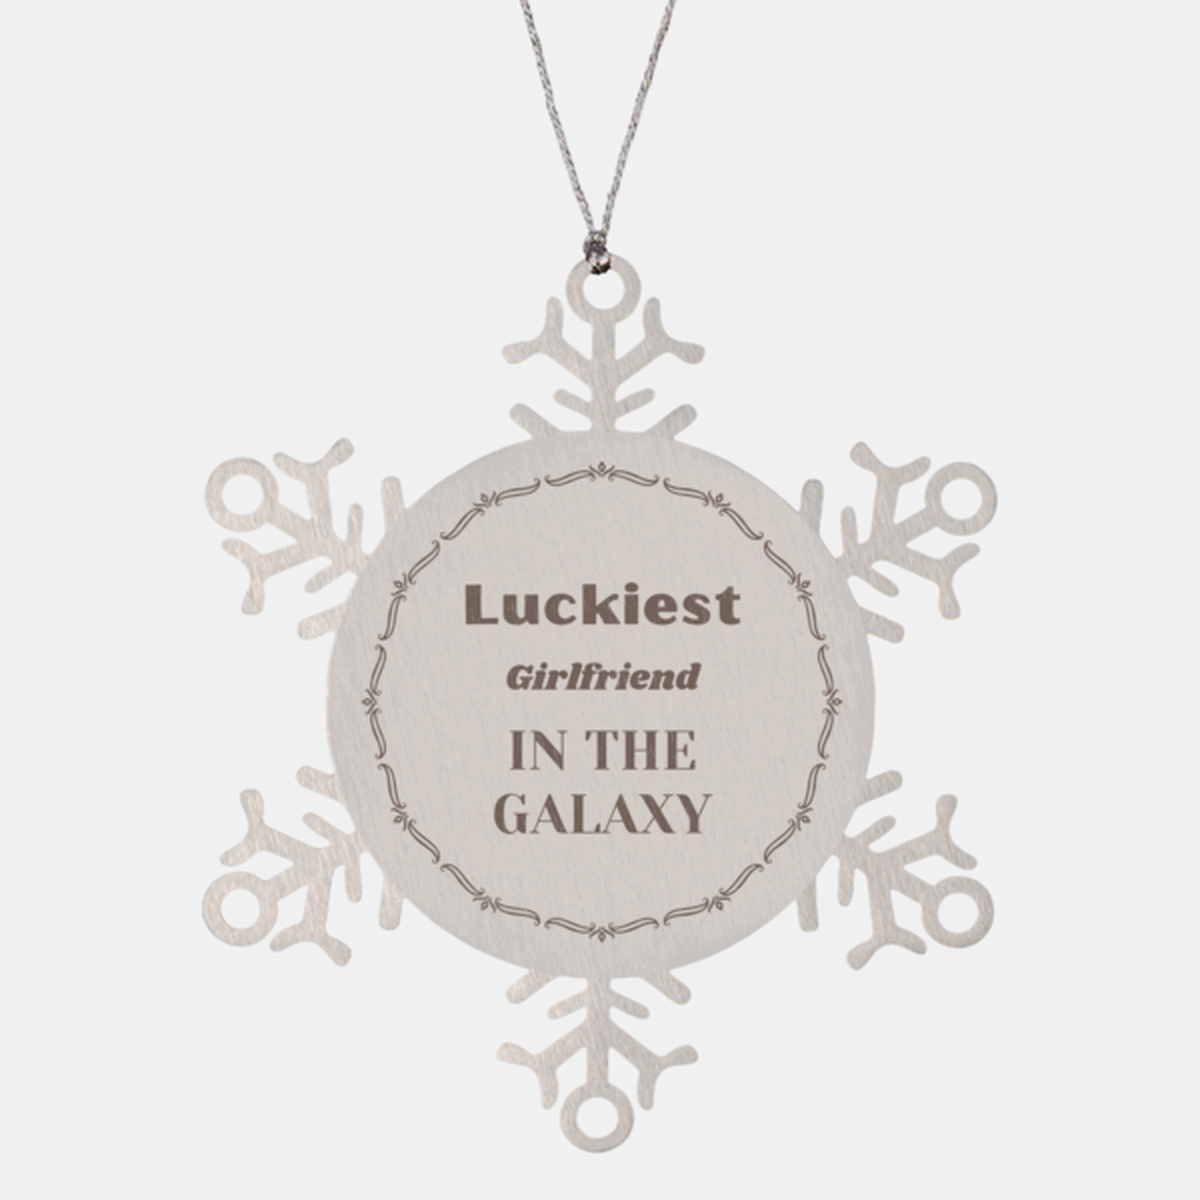 Luckiest Girlfriend in the Galaxy, To My Girlfriend Ornament Gifts, Christmas Girlfriend Snowflake Ornament Gifts, X-mas Decorations Unique Gifts For Girlfriend Men Women